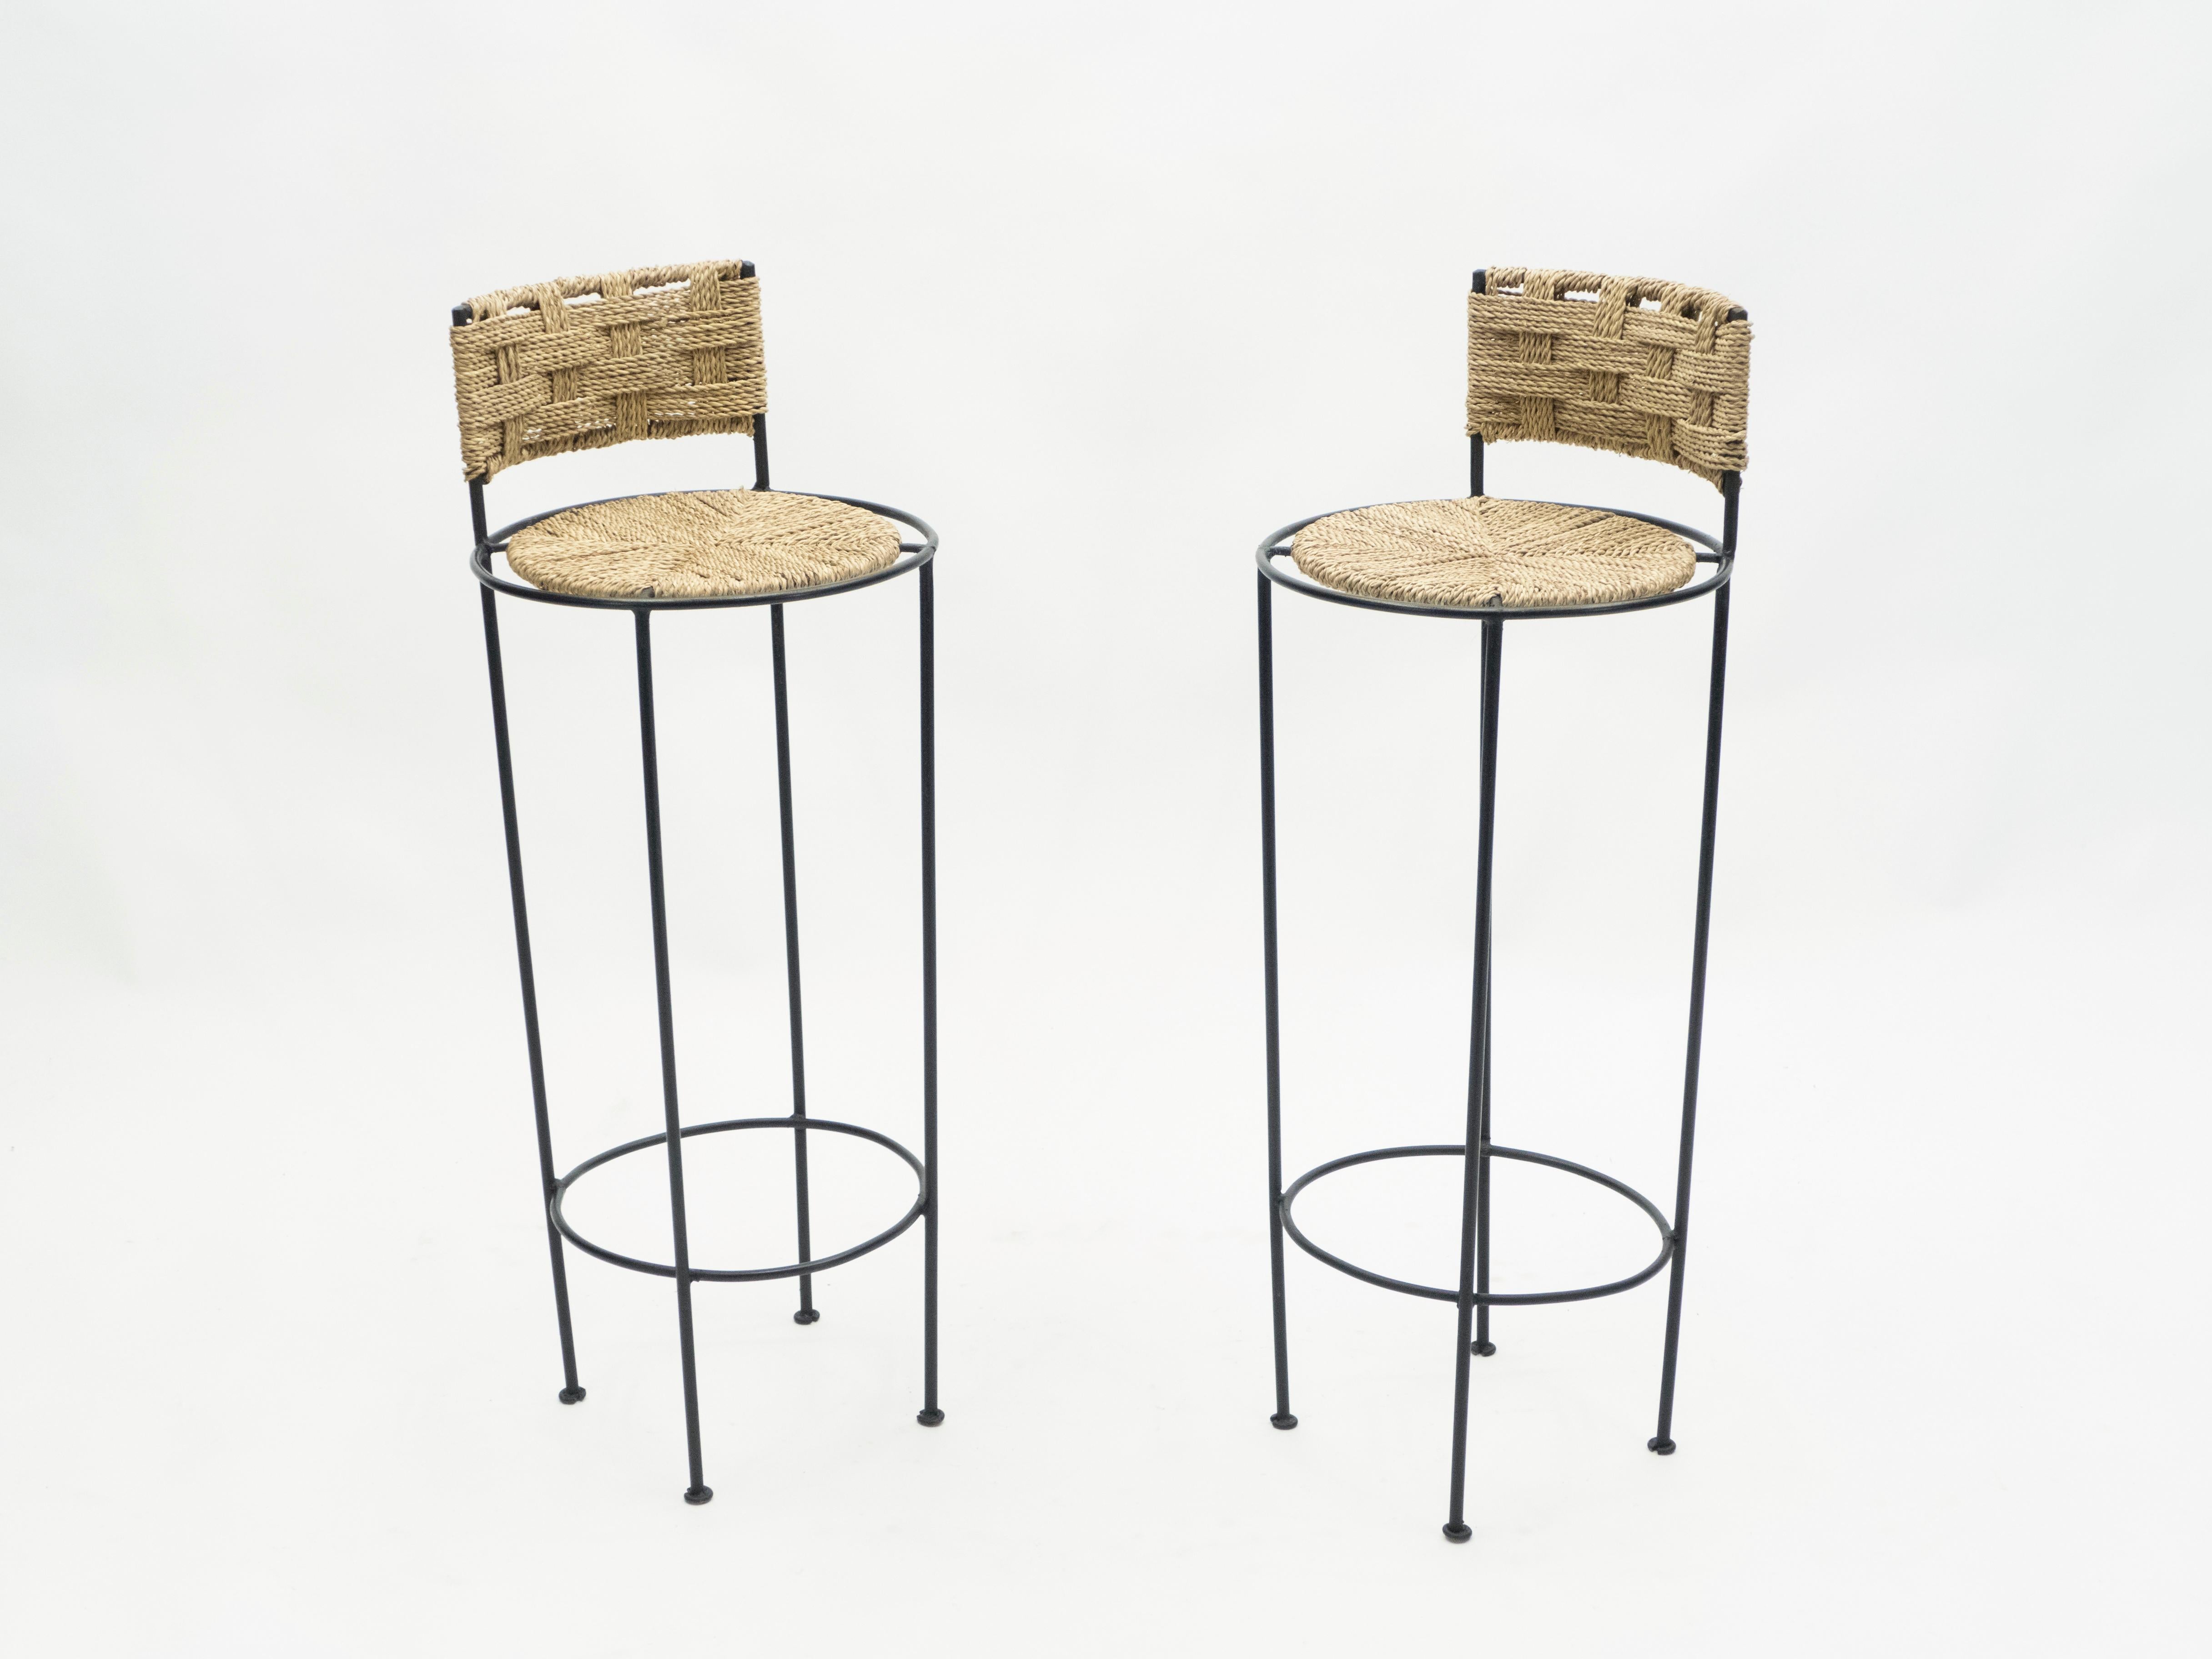 Beautiful patina is evident along the abaca rope seating and backrest of this pair of bar stools by Adrien Audoux et Frida Minet, giving away their vintage status. This natural style is typical of the French design of Audoux-Minet. Timeless